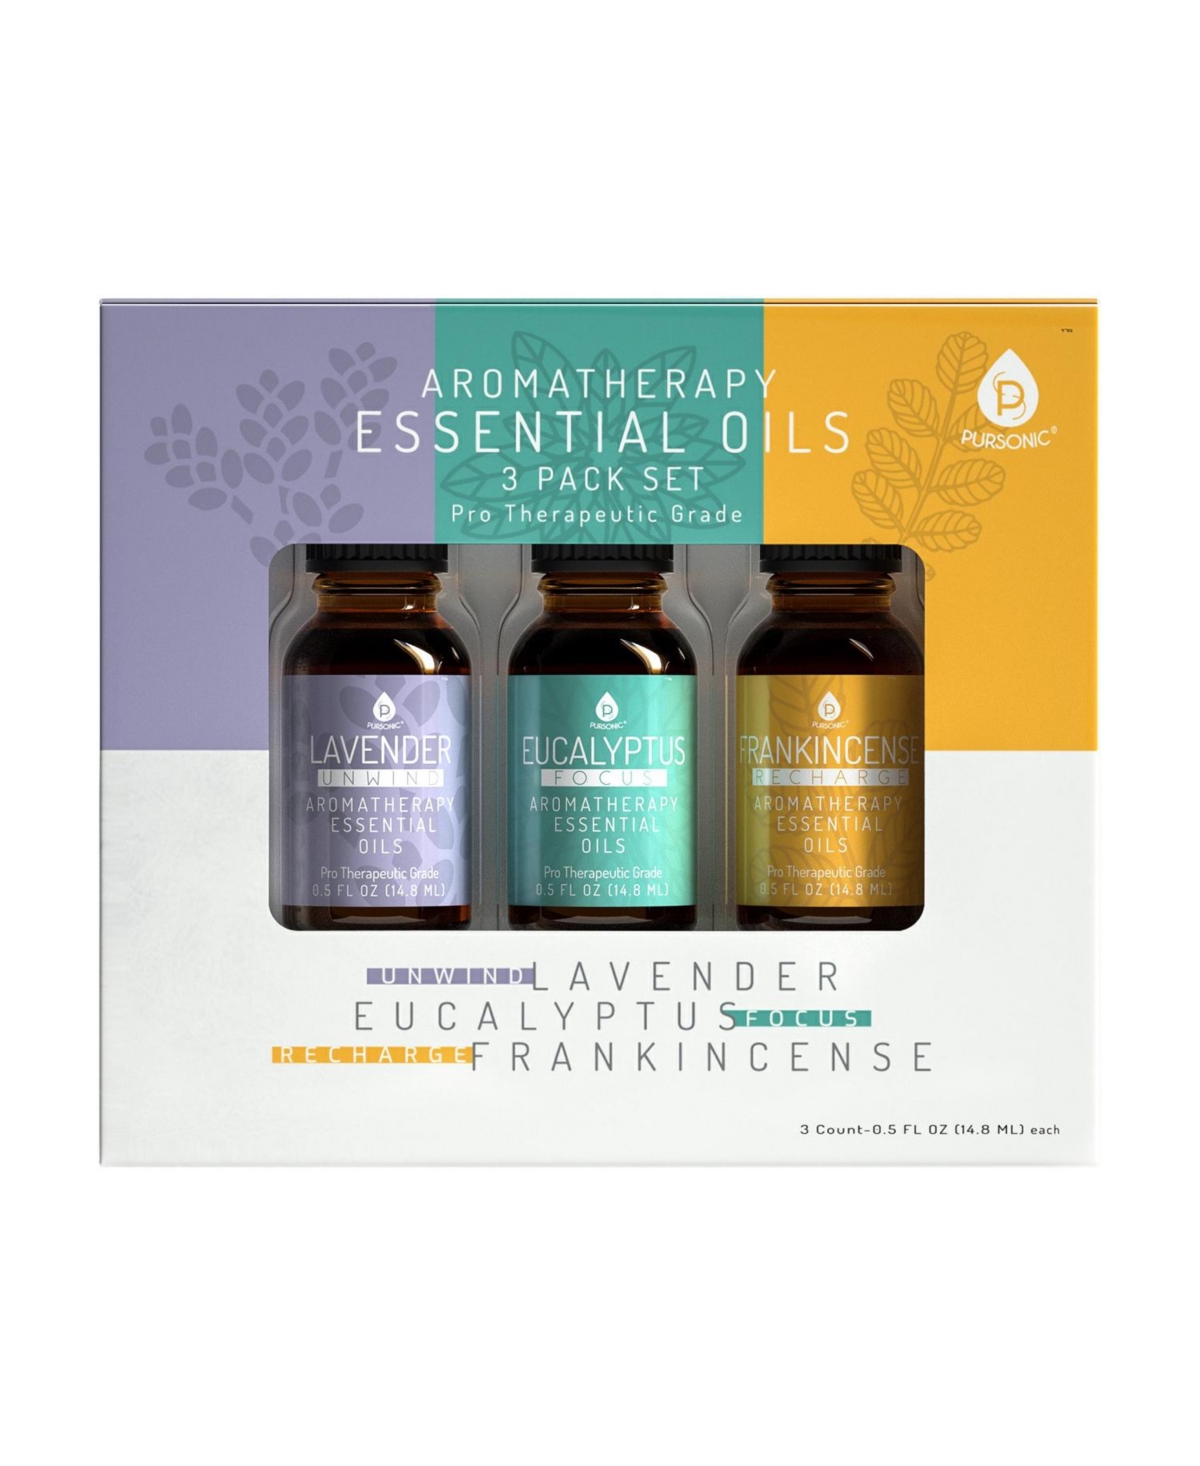 3 Pack Aromatherapy Essential oils (Lavender, Eucalyptus, Frankincense) - Natural